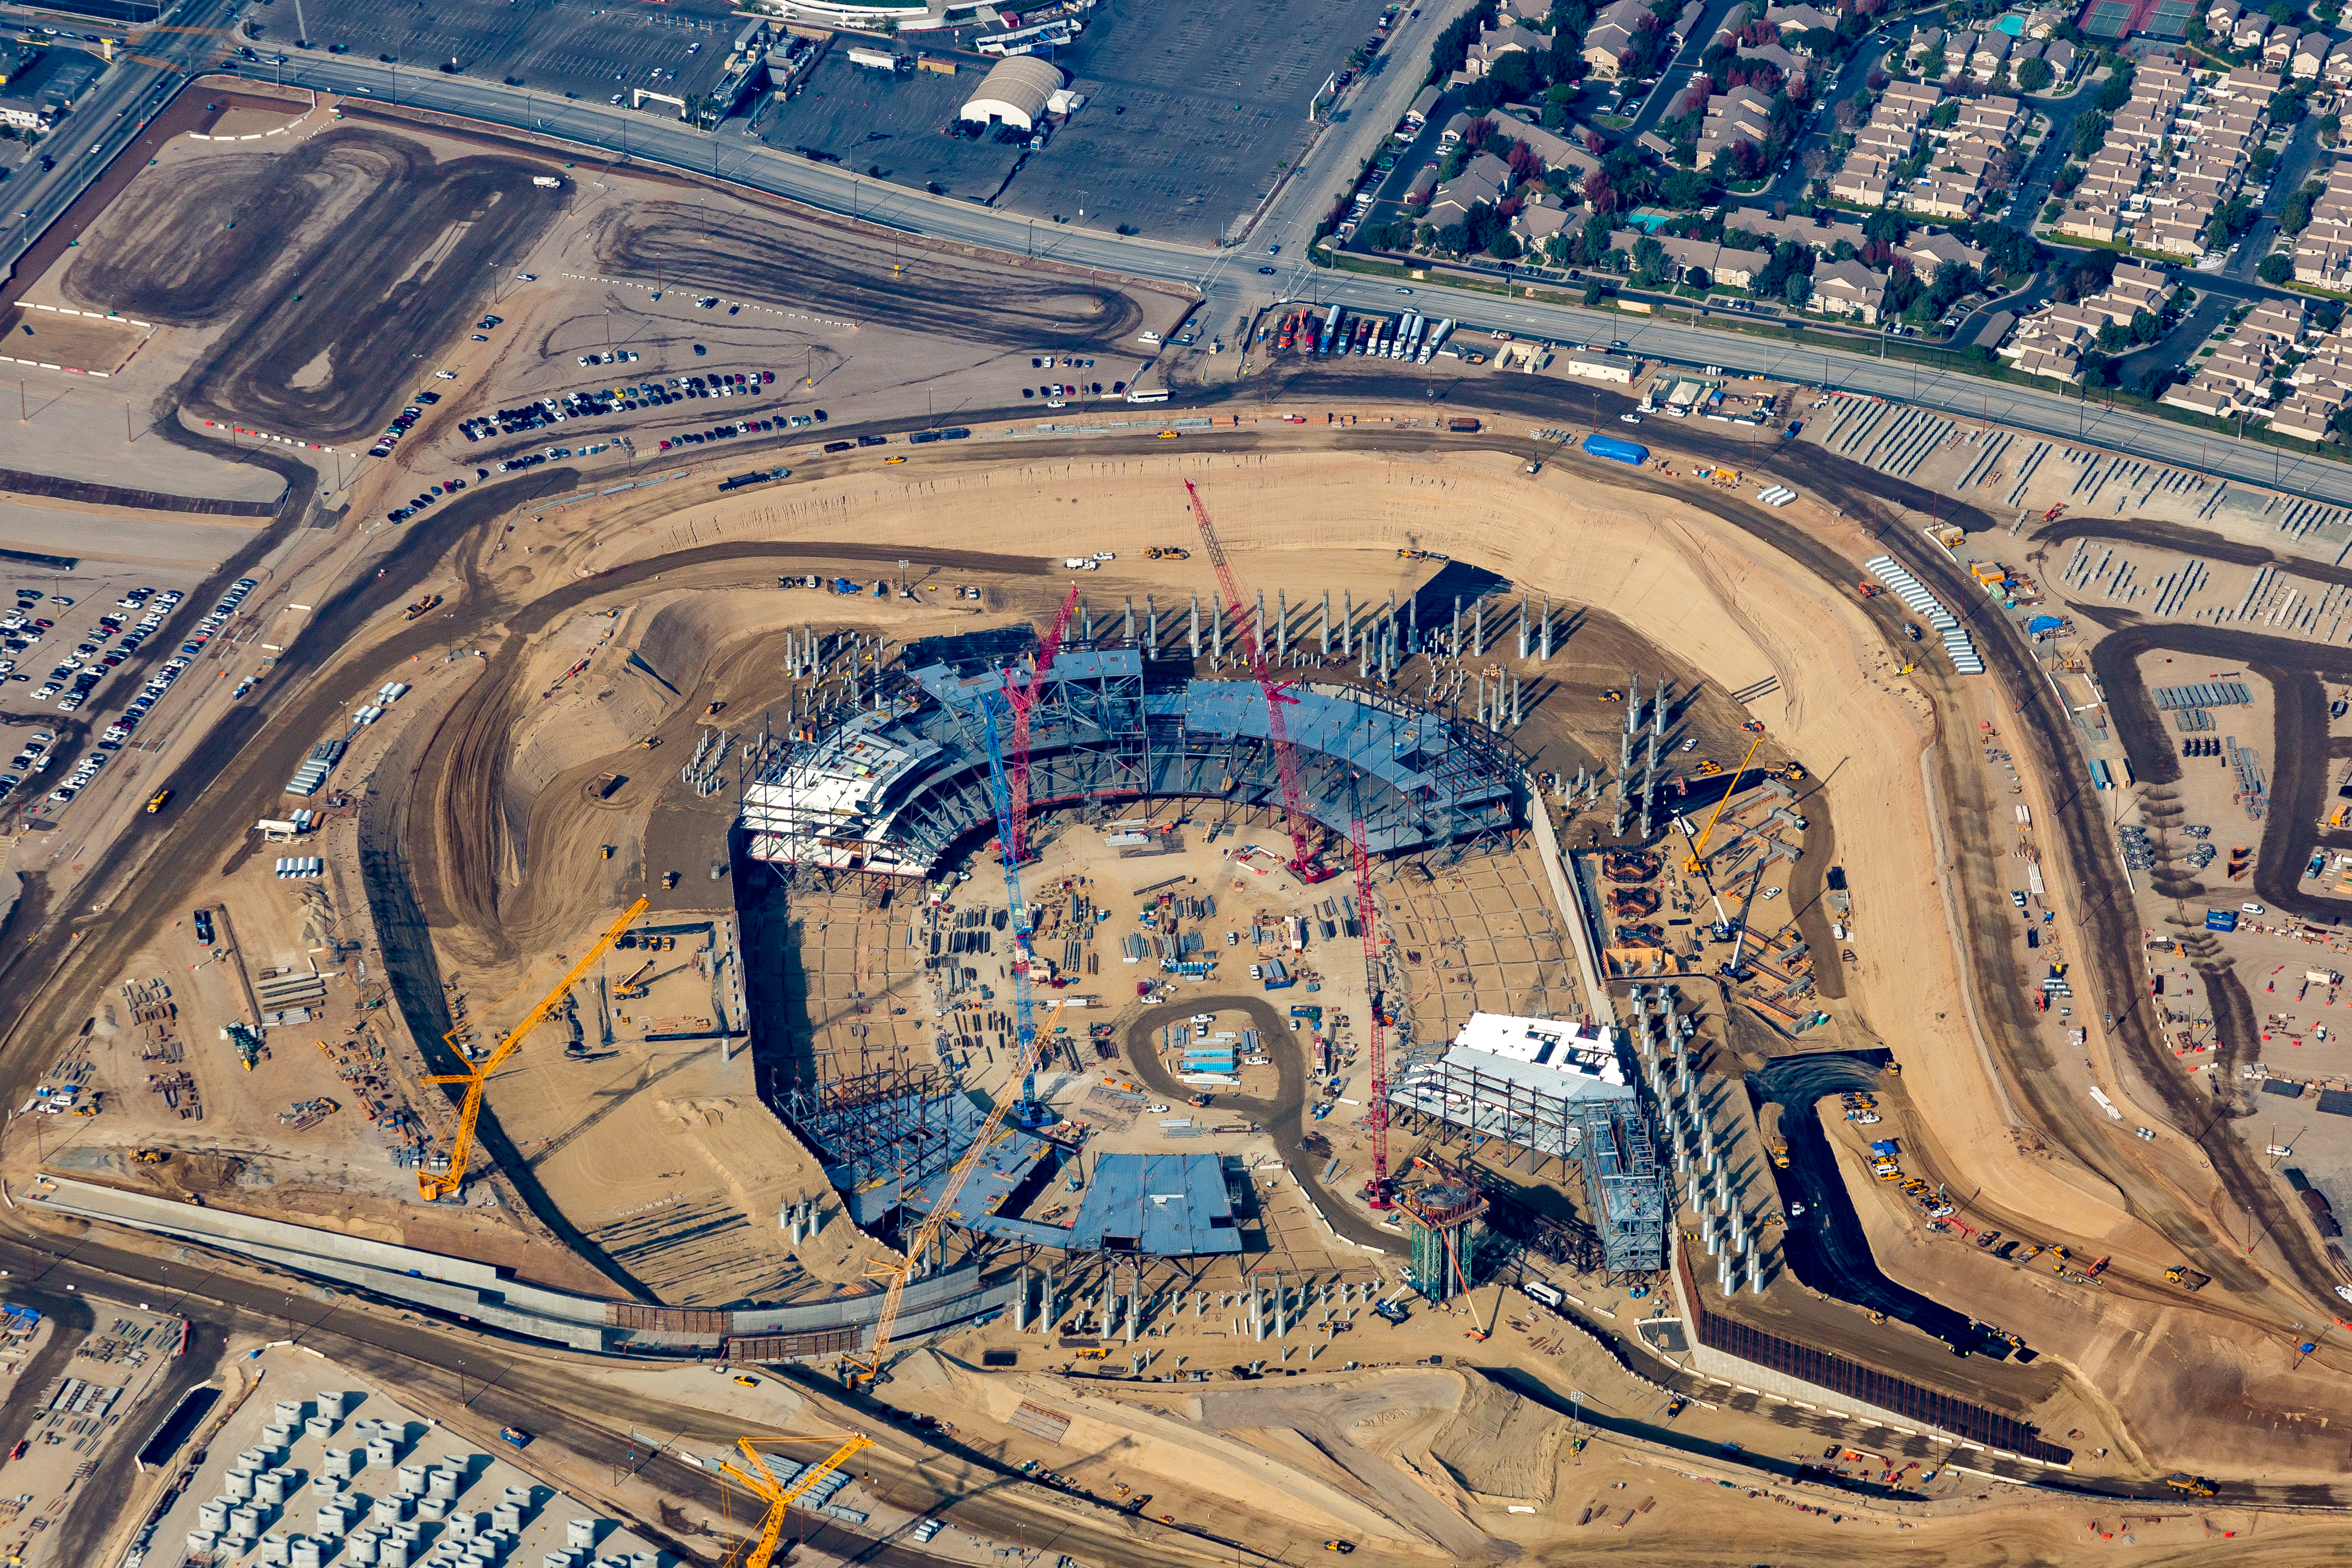 Aerial view of construction at Inglewood NFL stadium